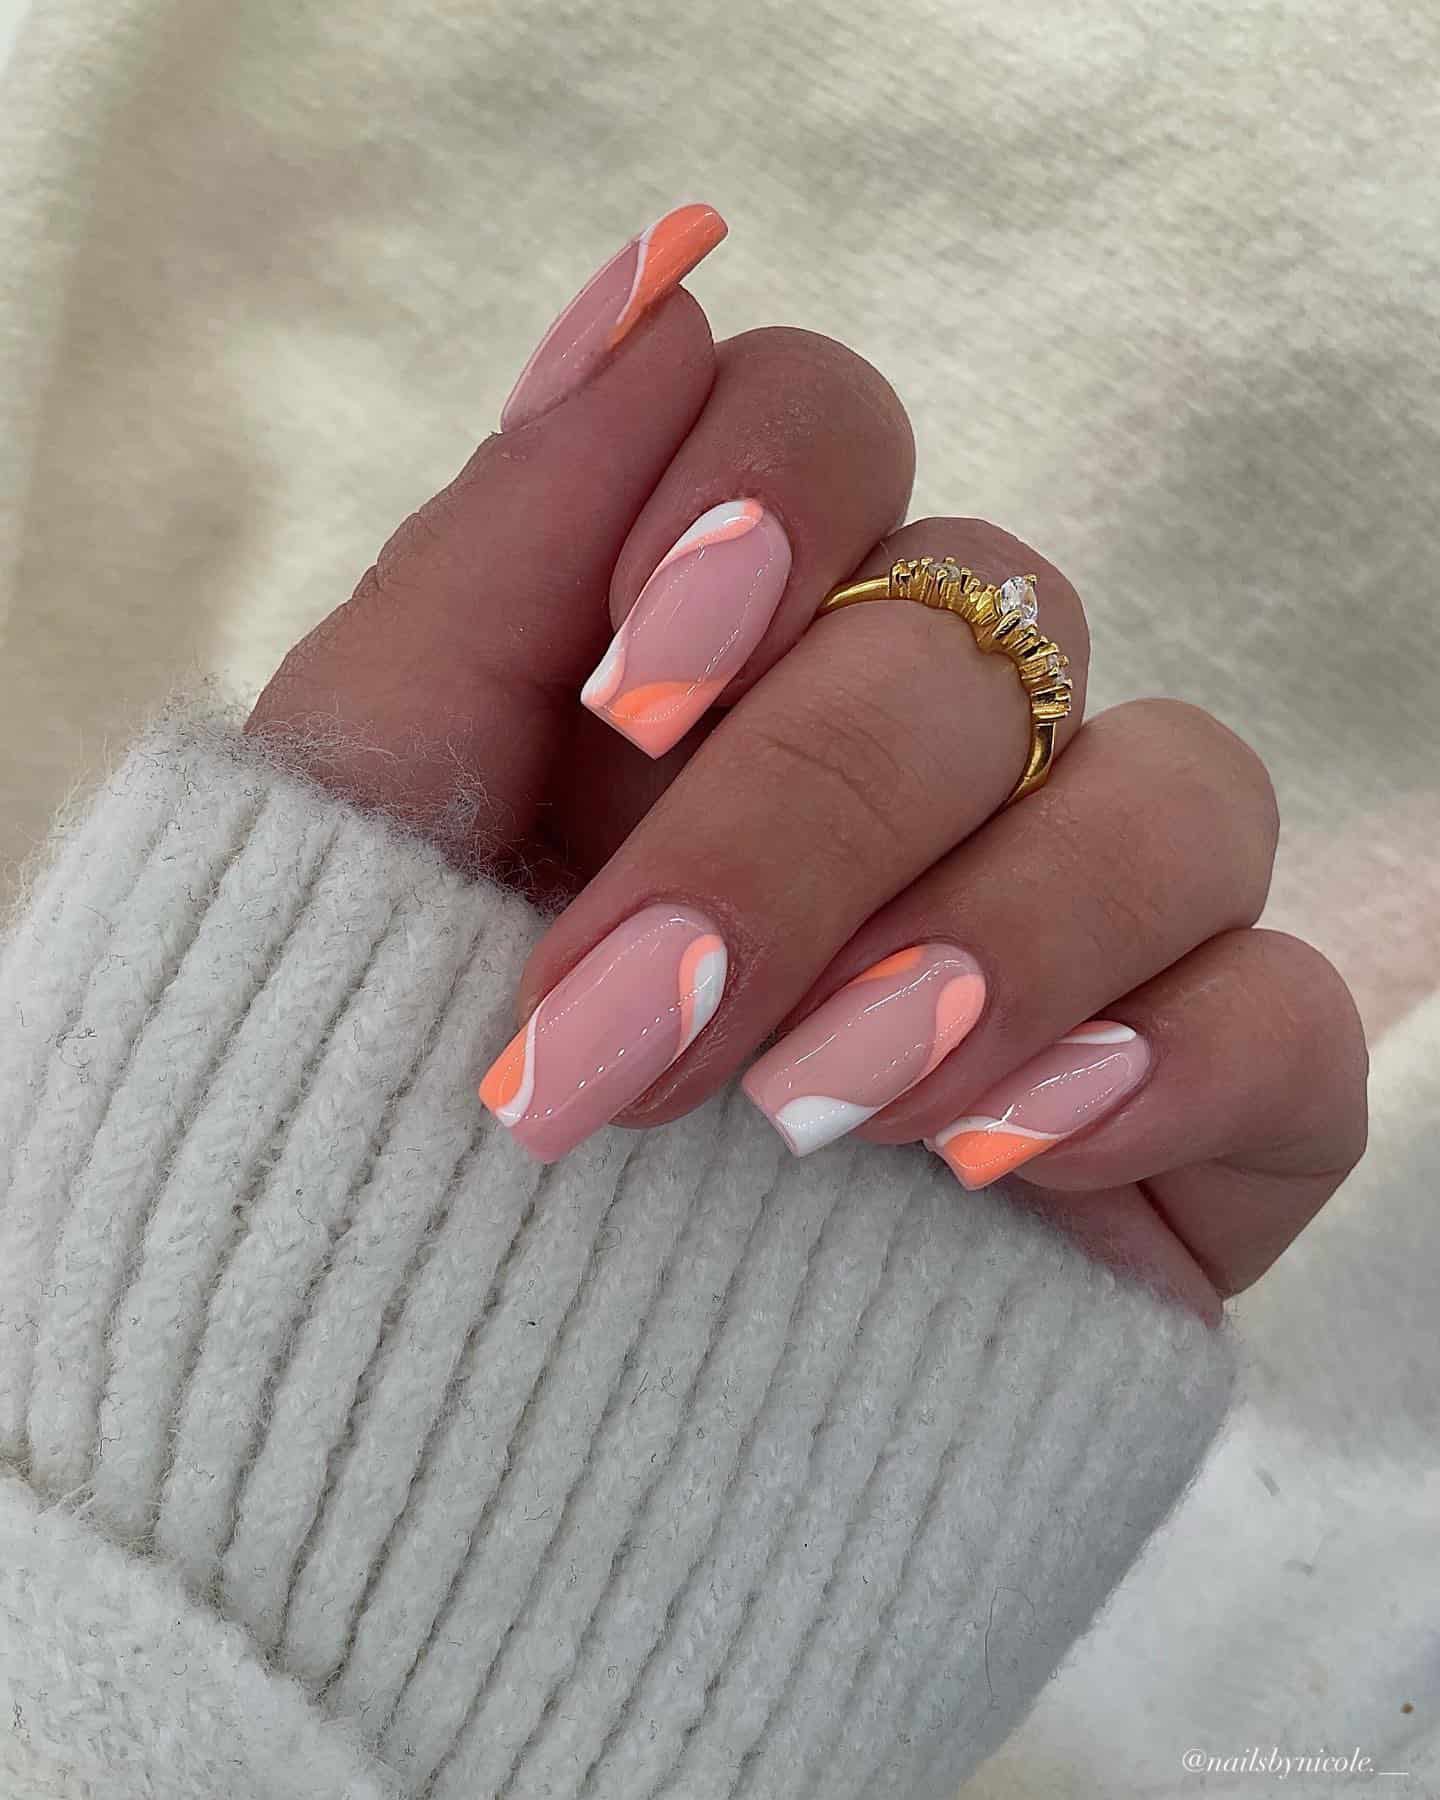 A hand with square nude pink nails painted in peach, coral peach, and white waves